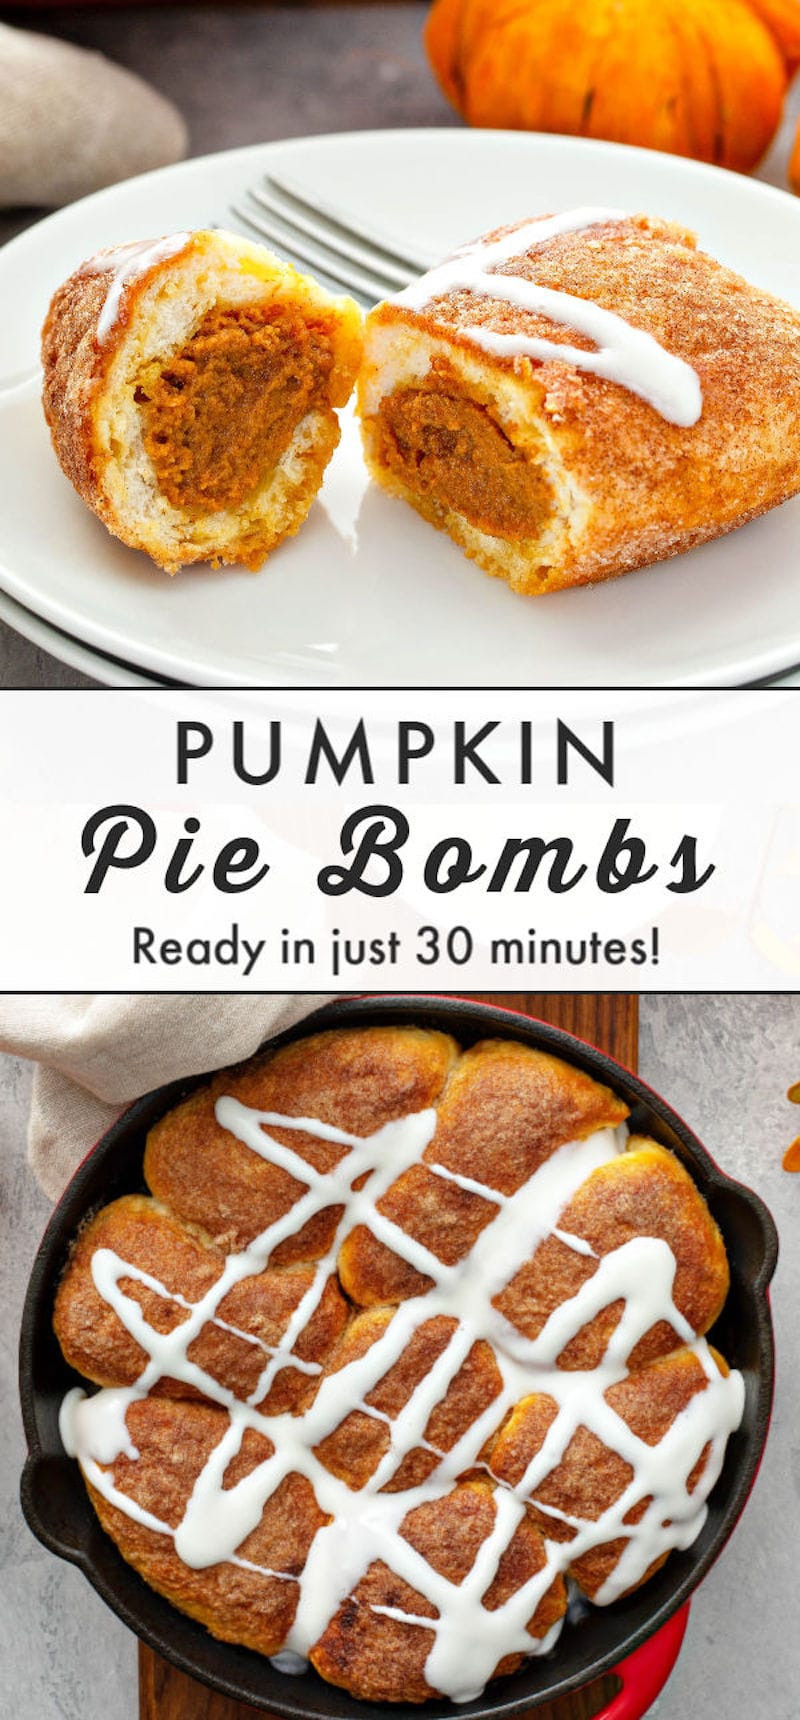 Canned Pumpkin Pie Filling
 These sweet Pumpkin Pie Bombs are canned biscuits stuffed